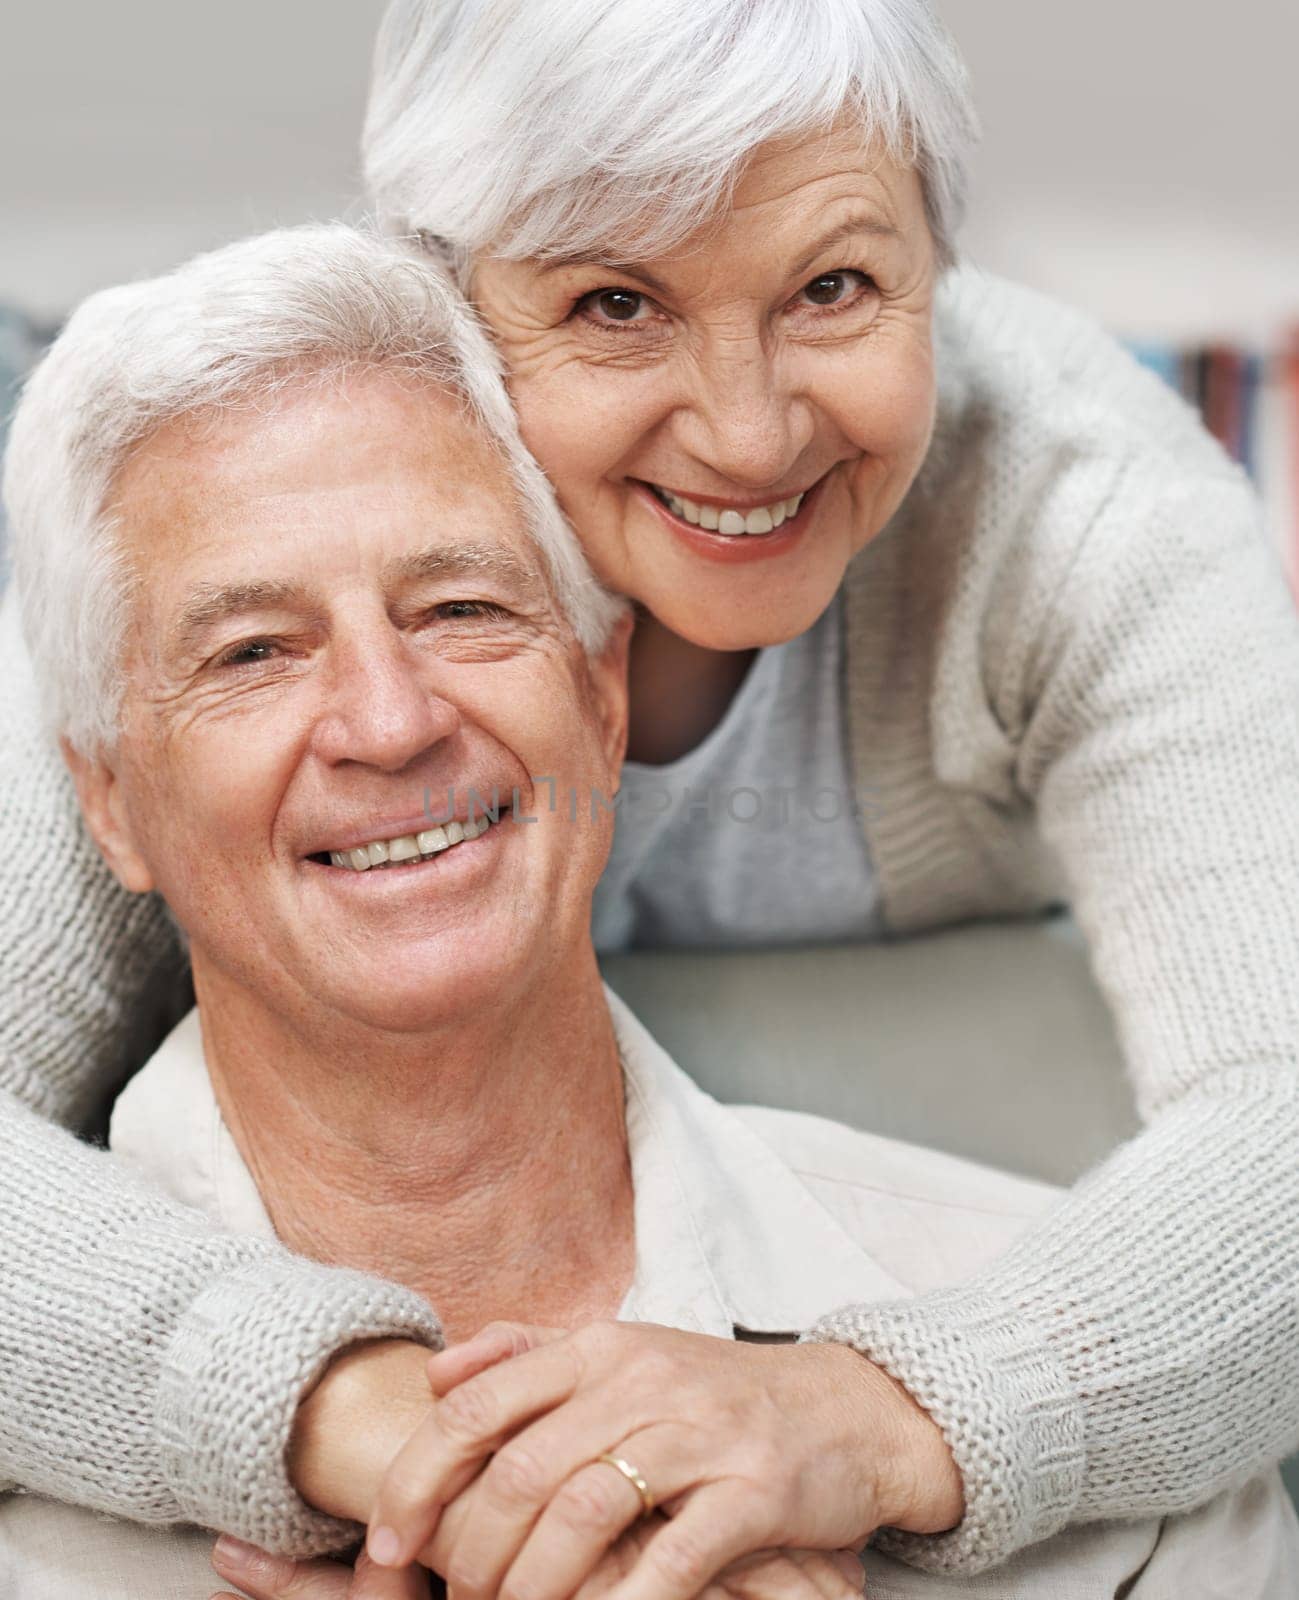 Senior, happy couple and portrait smile with hug for love, romance or embrace in relationship or marriage at home. Elderly woman face hugging man smiling for care or bonding together in retirement.